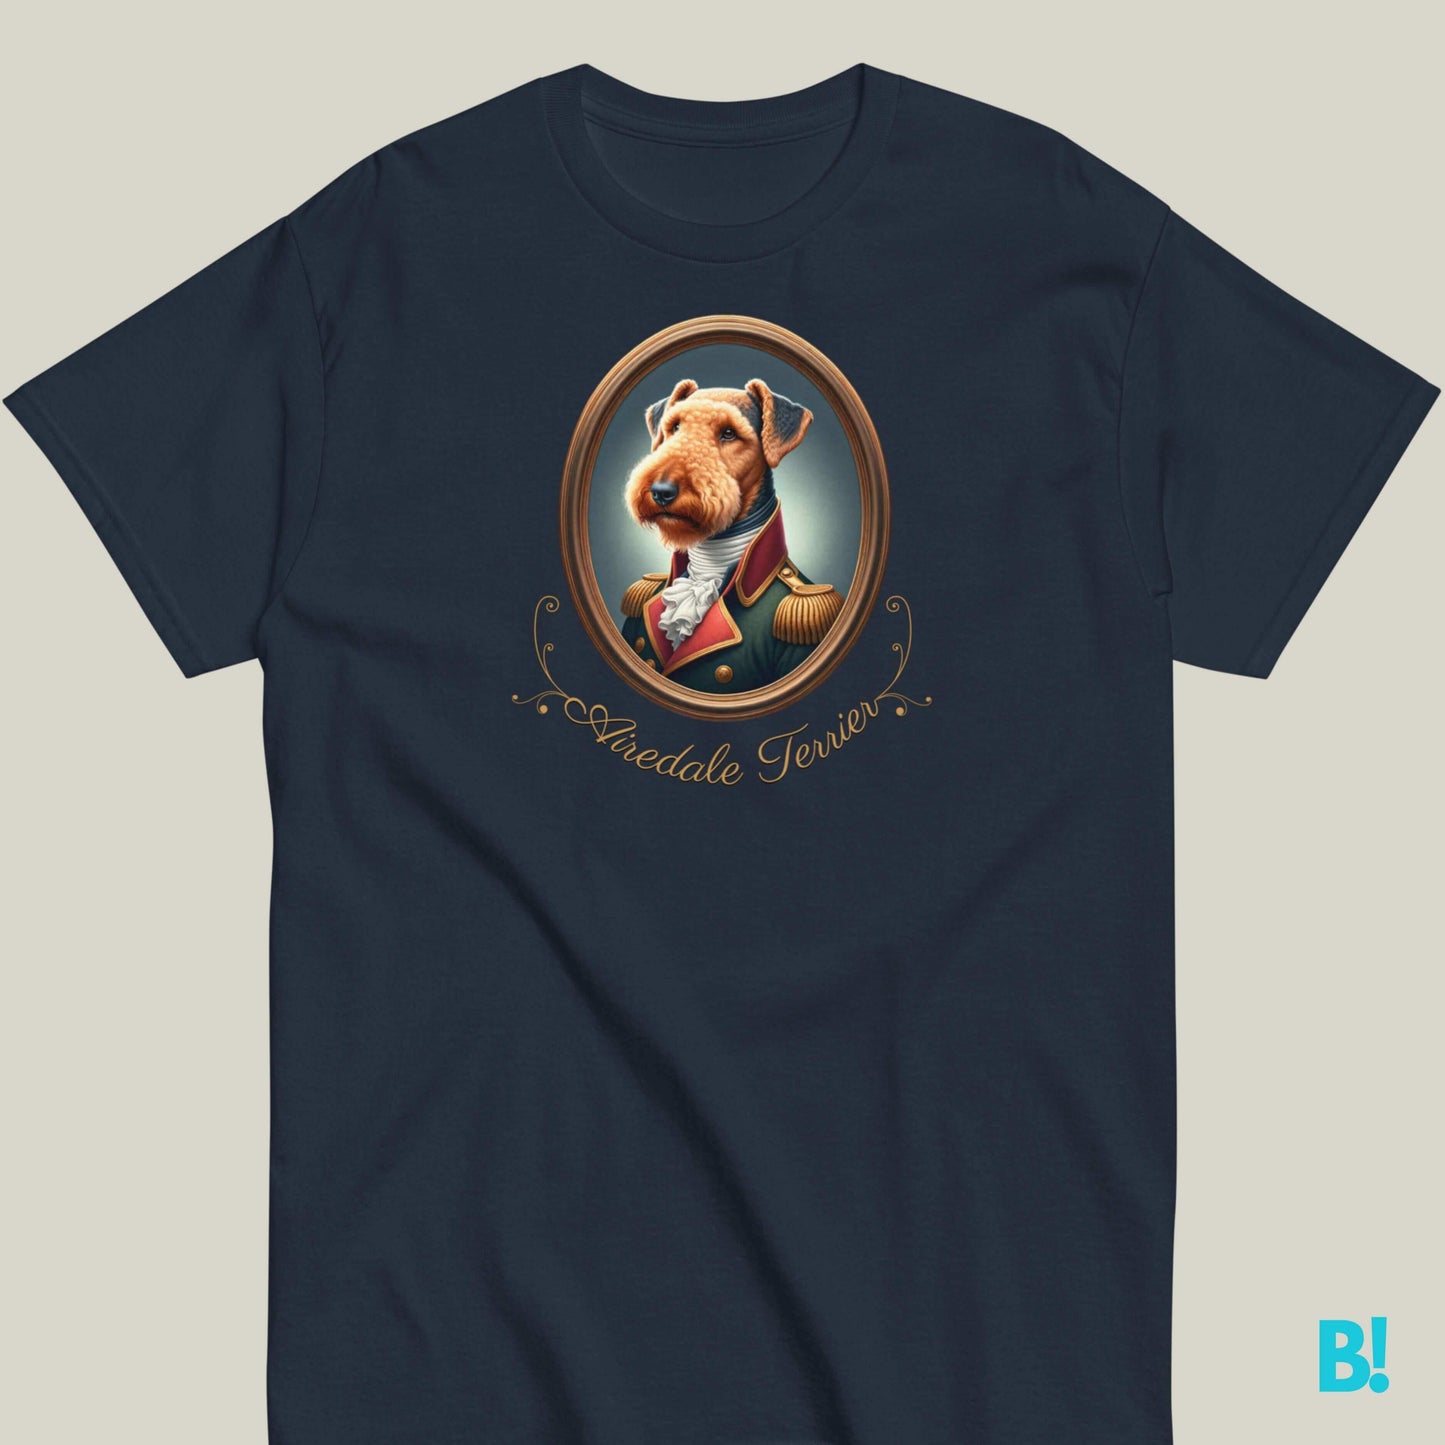 Airedale Terrier Portrait Tee - 100% Cotton Royal T-Shirt Showcase Airedale valor with our exclusive baroque portrait tee! Premium cotton, unisex fit, 7 colors, sizes S-XXXL. Ideal for dog lovers. €29.50 B!NKY Comfywear